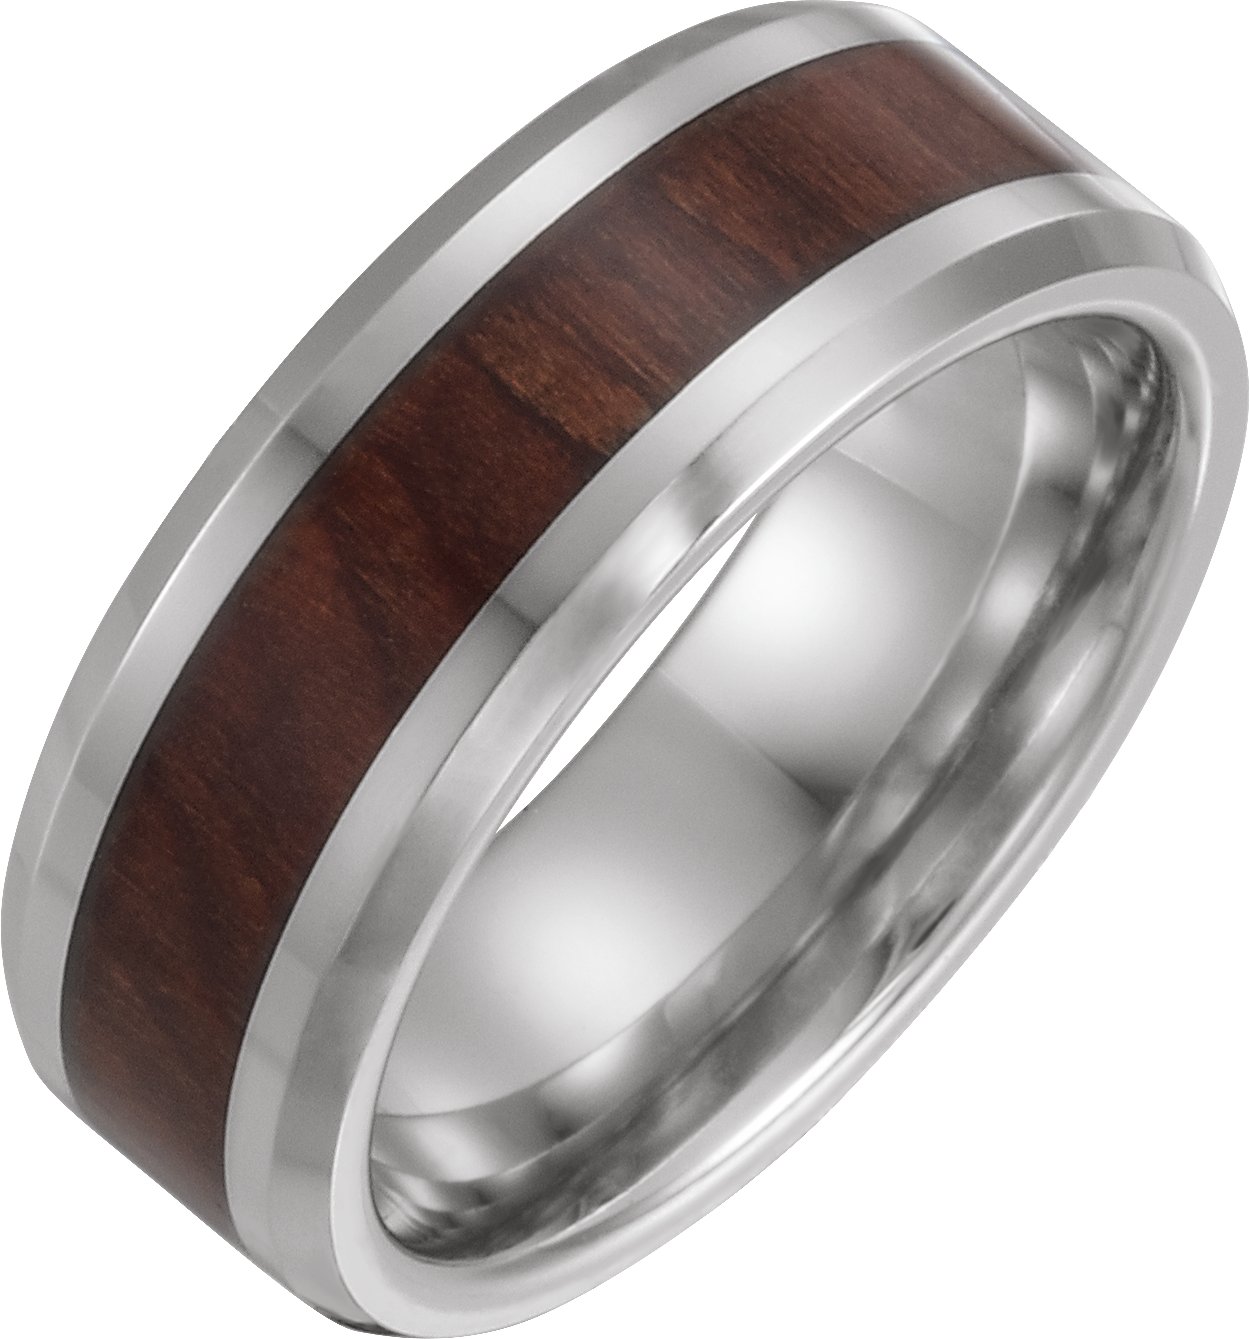 Cobalt 8 mm Beveled Edge Band with Wood Inlay Size 5 Ref 15067986